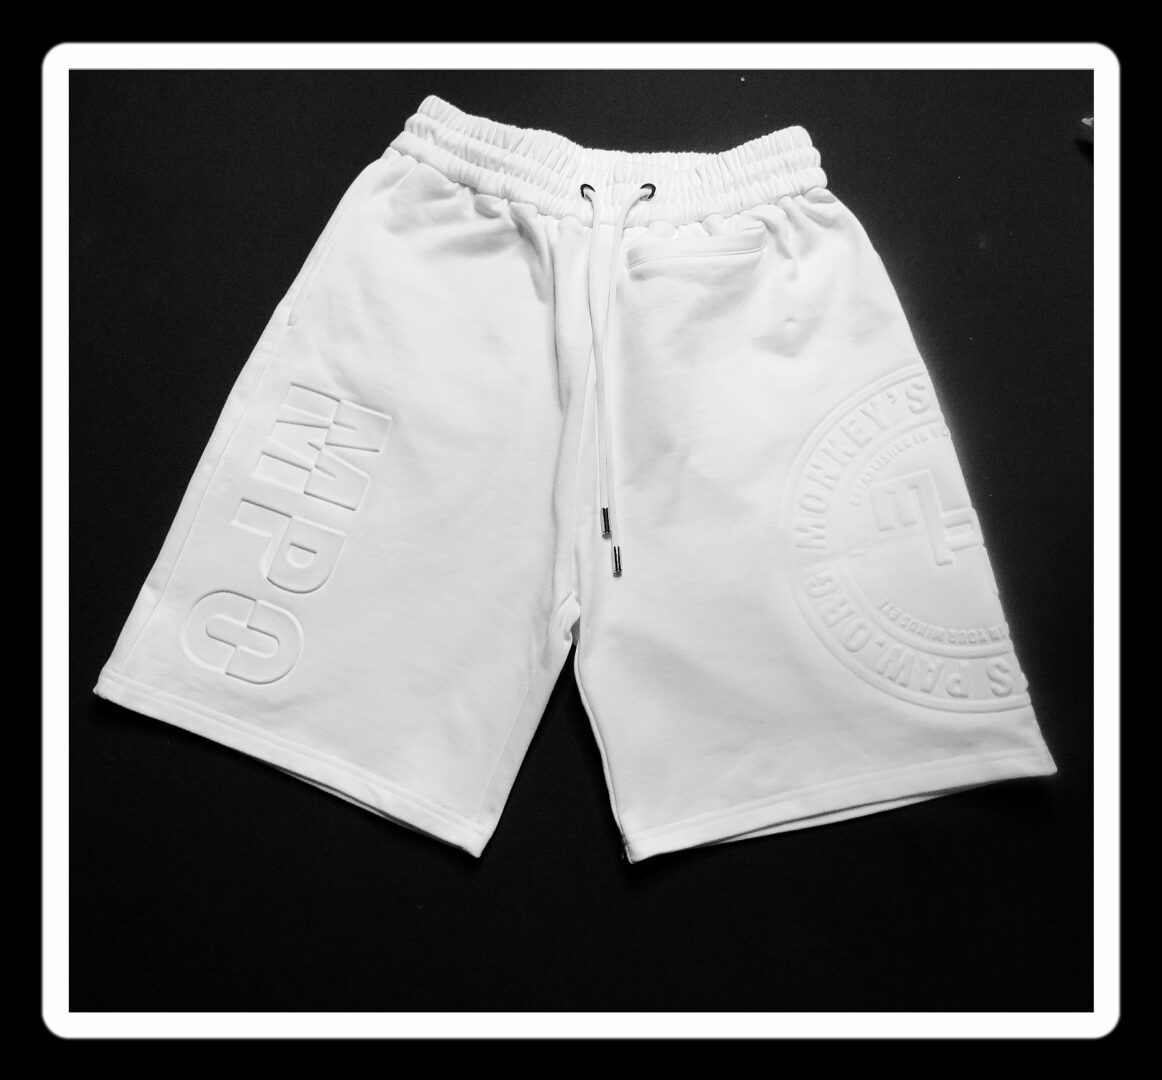 A pair of white shorts on a black background